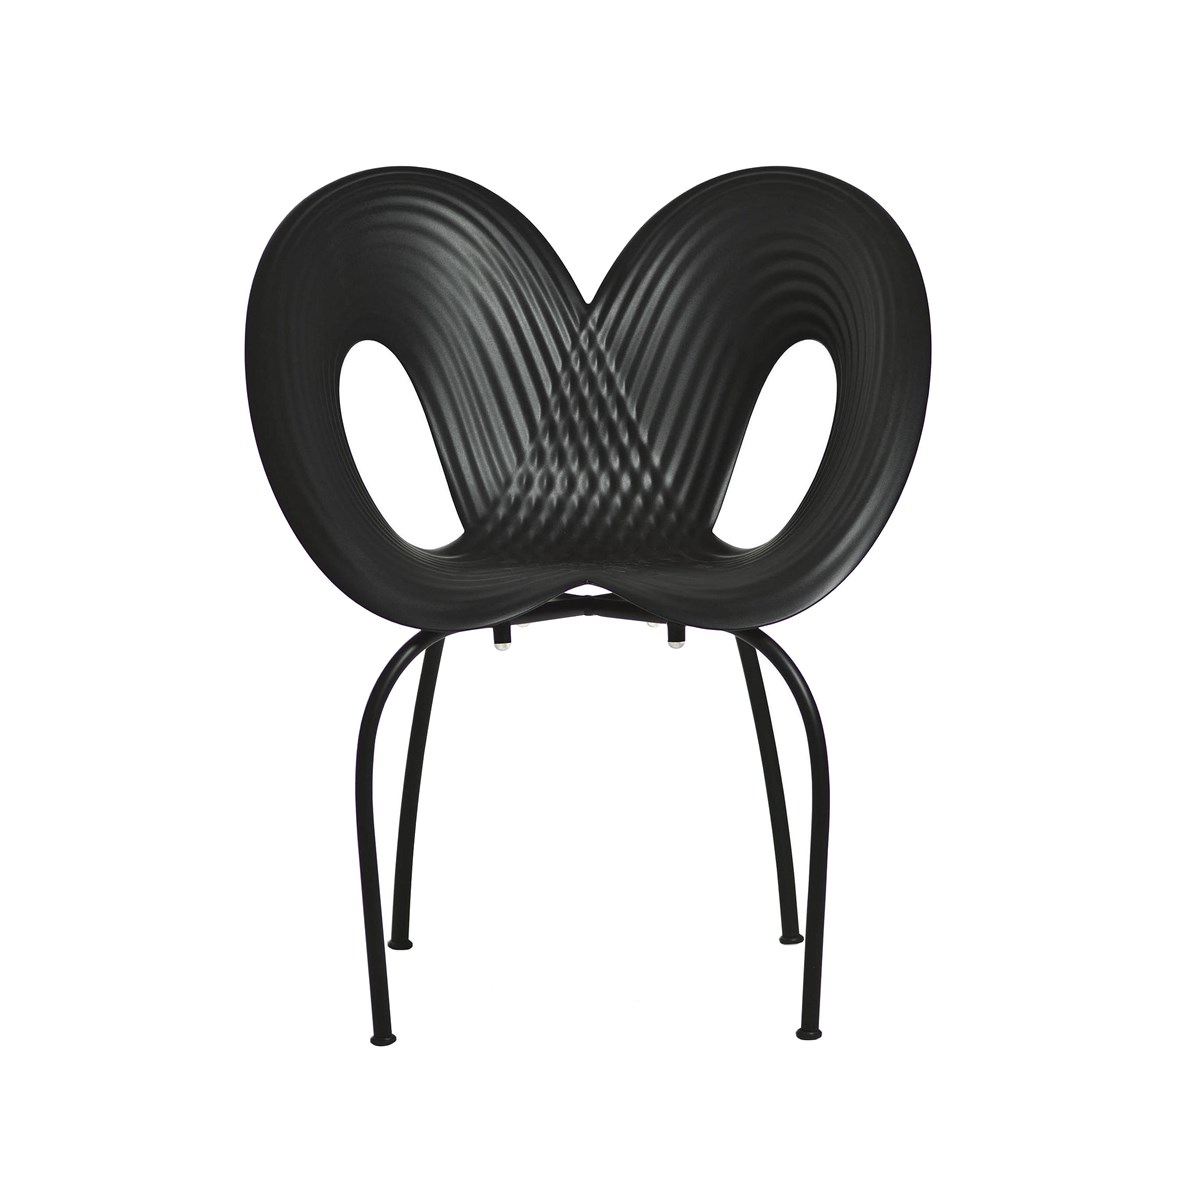 Ripple Chair Outdoor Black 8788 Zoom